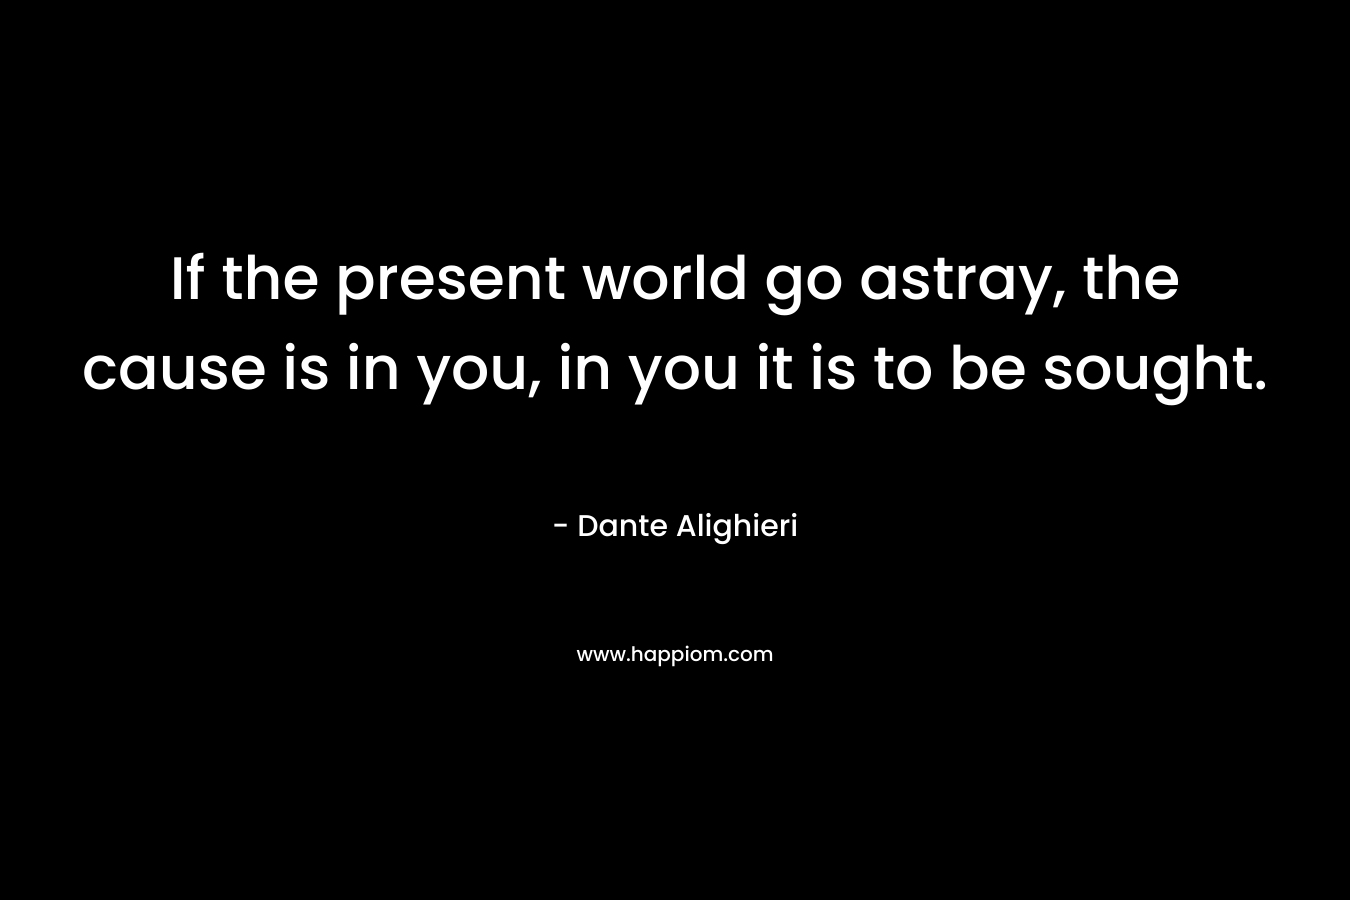 If the present world go astray, the cause is in you, in you it is to be sought. – Dante Alighieri